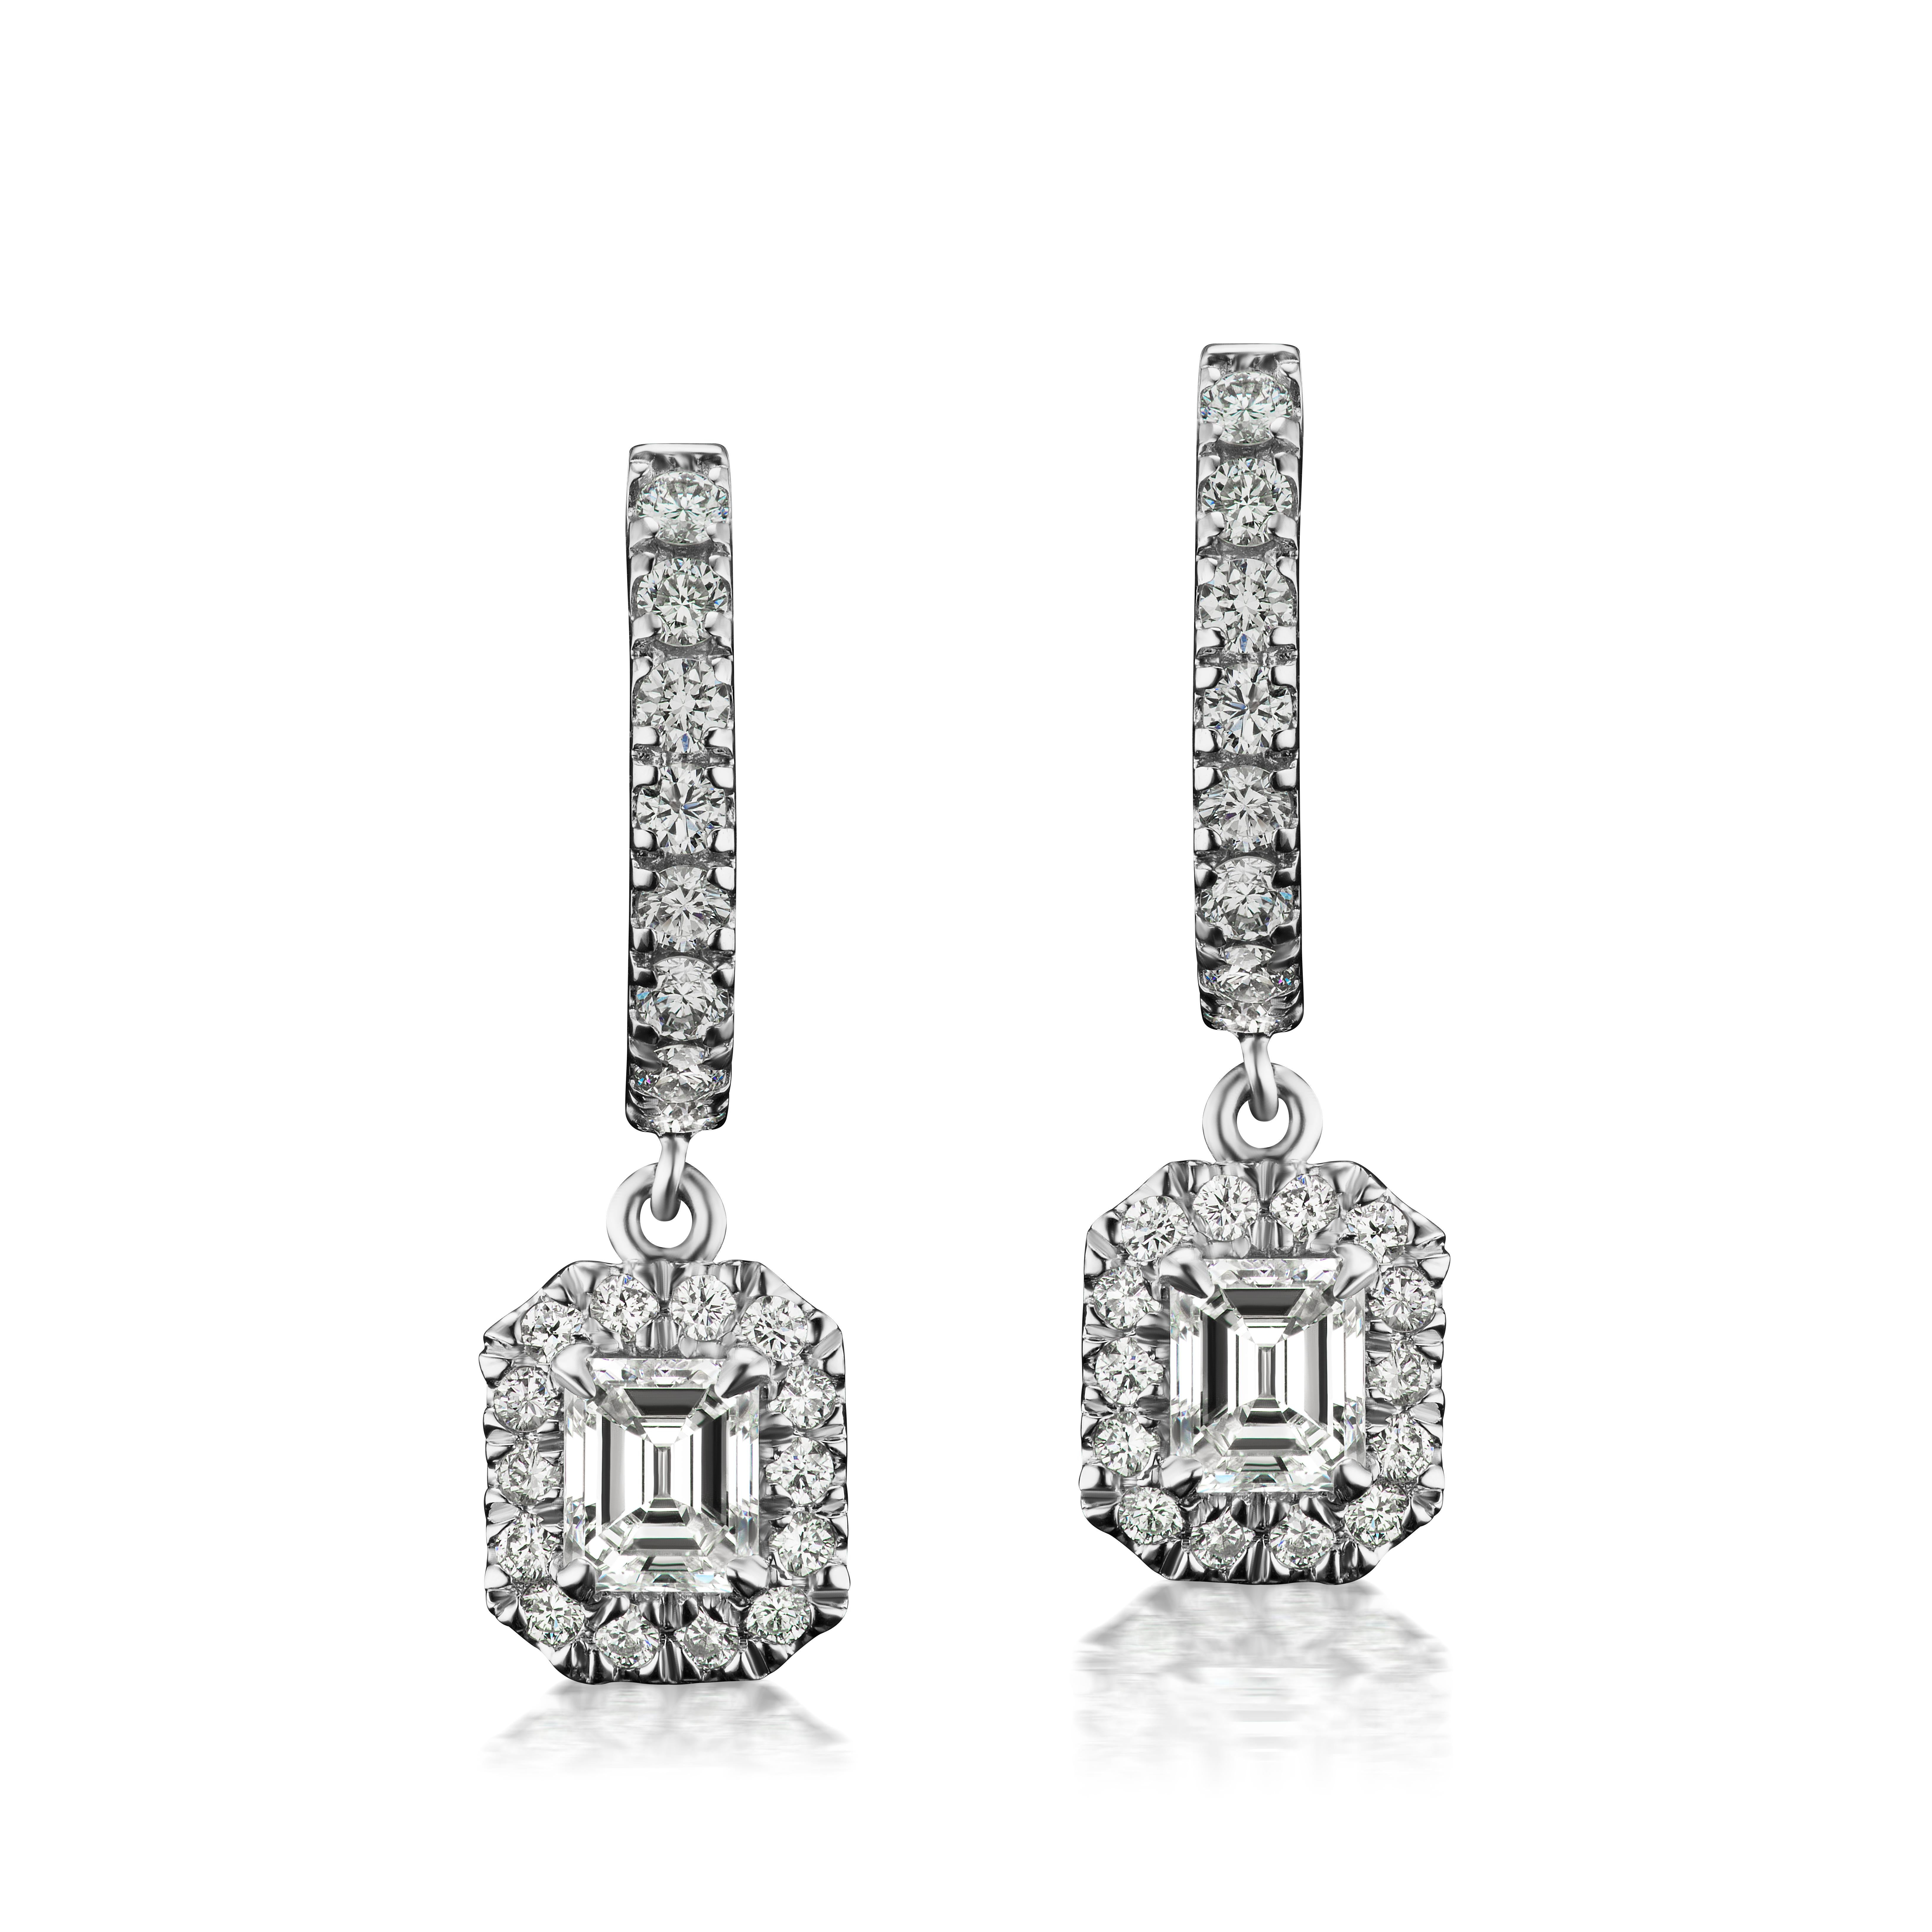 Emerald Diamond Dangling Drop Earrings in 14K White Gold. ( 1.49 Ct tw.)

Why We Love It:
Everyday Luxury.
This emerald cut diamond is such a dream! Excellent specs with sleek lines and a lovely shape!
The unique look of the emerald cut diamond is